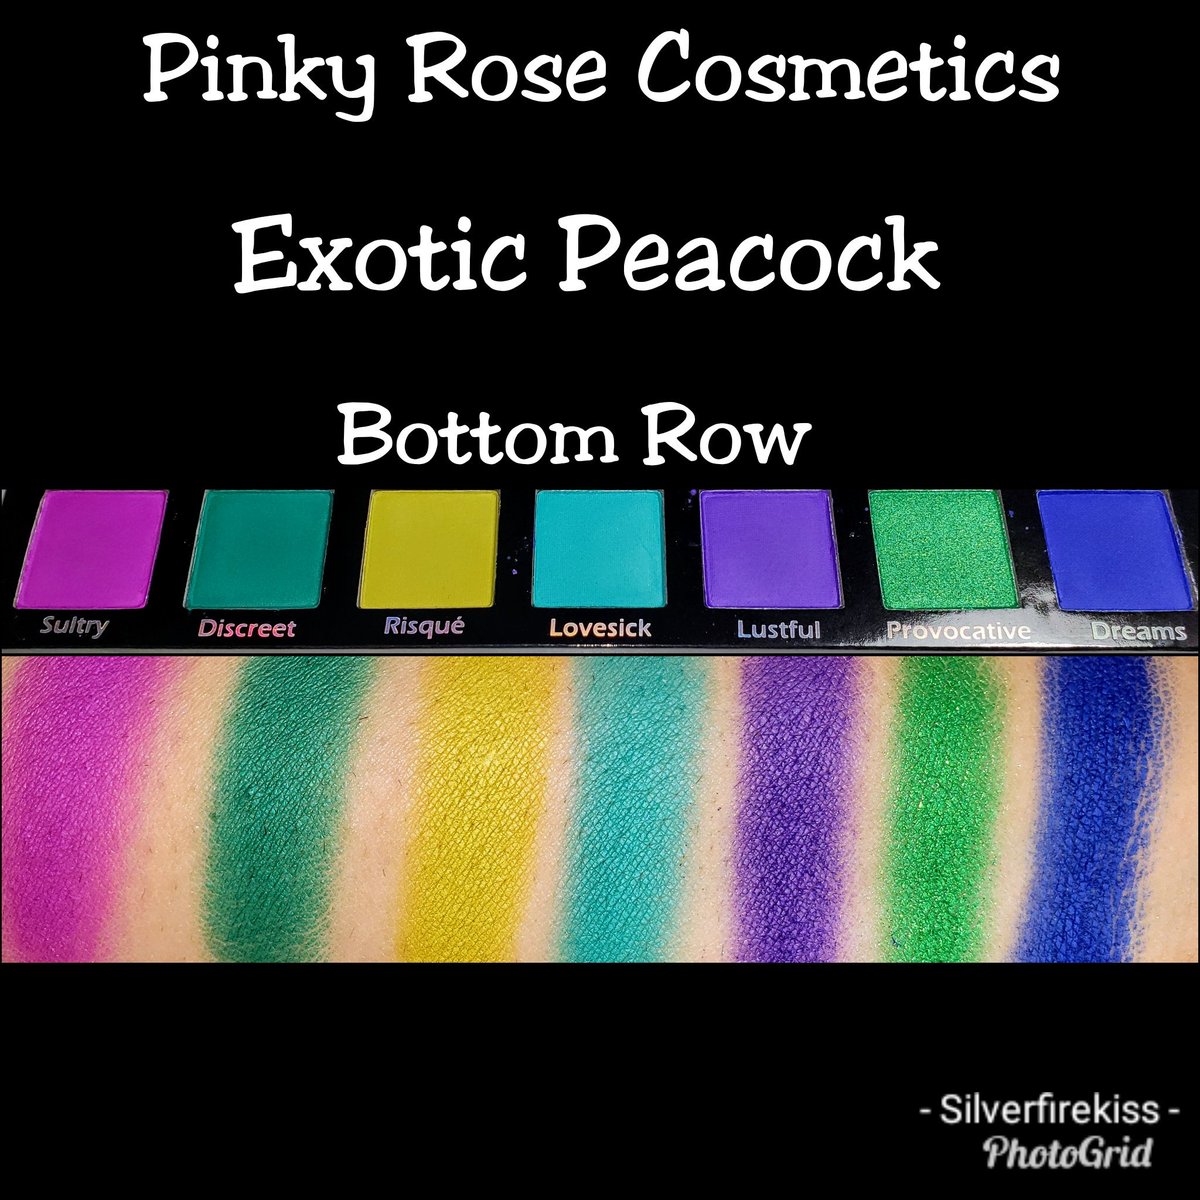 Exotic Peacock Palette Beautiful Bright EyeShadow Palette 
Inspired by Michelle Huerta Co-Founder of @pinkyrosemakeup 
EyeShadow Palette is mixture of Greens, Teals, Blues & Purples 
#pinkyrosecosmetics #trilogycollection #Expalette #beauty #makeup #mua #makeupjunkie #makeuplook